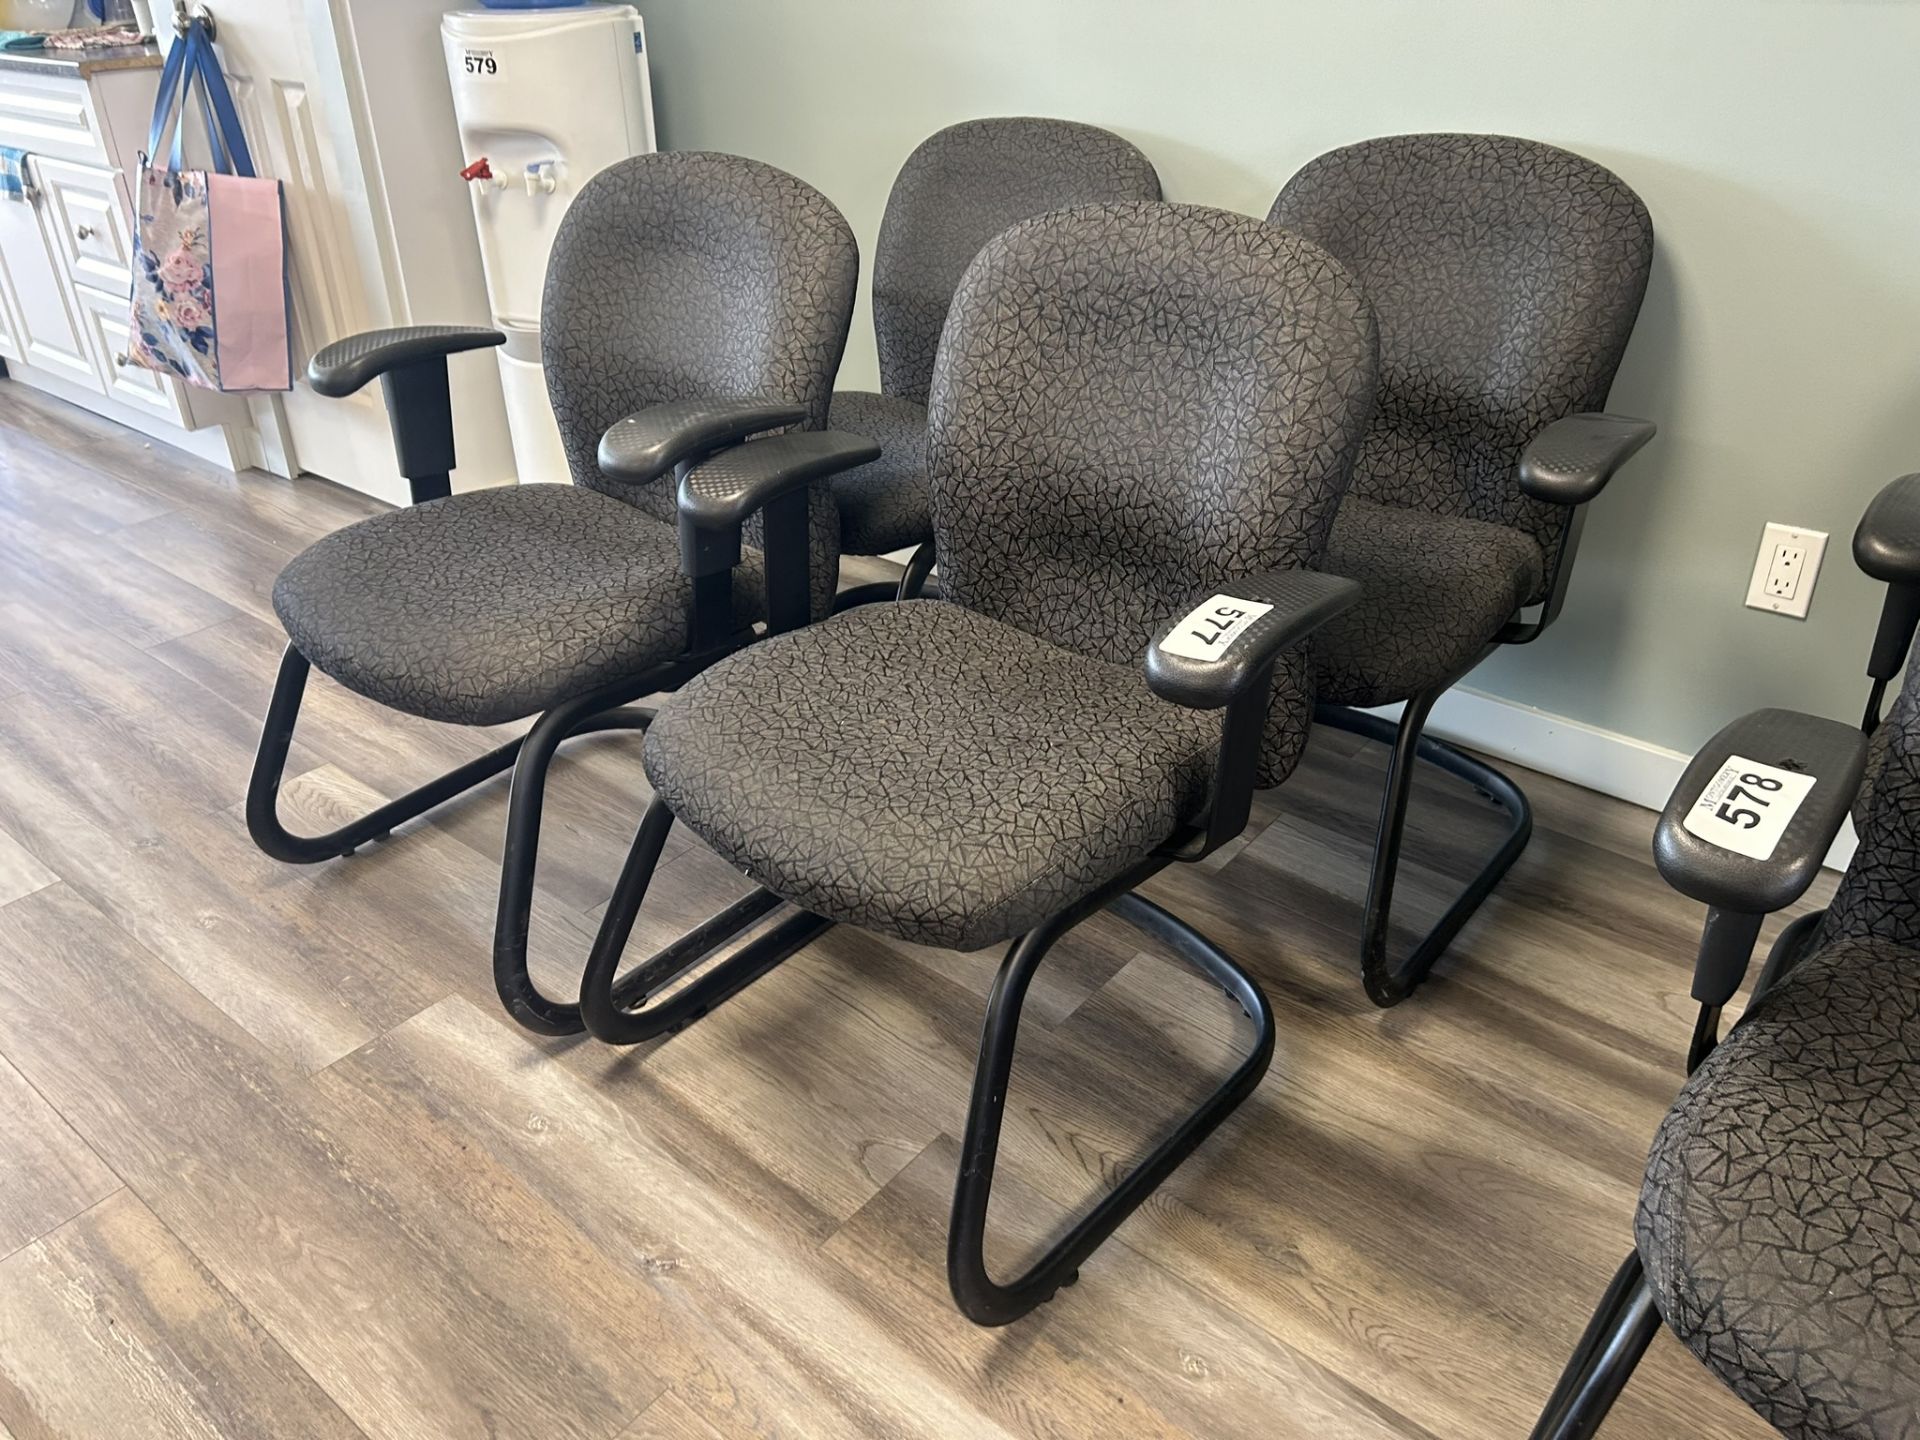 4-SKIDDED CUSHIONED OFFICE CHAIRS